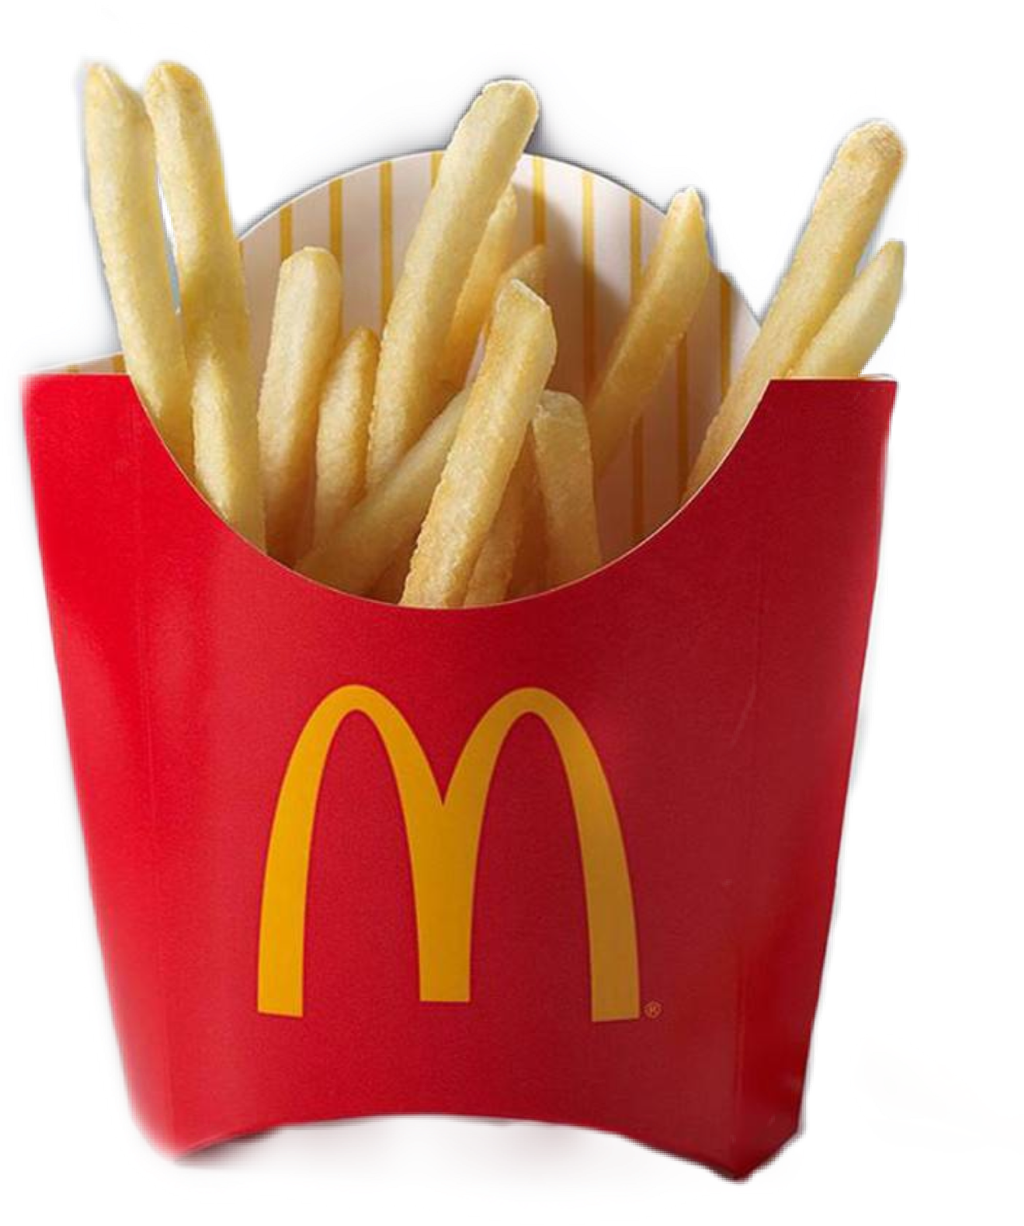 Mc Donalds French Fries Red Container PNG